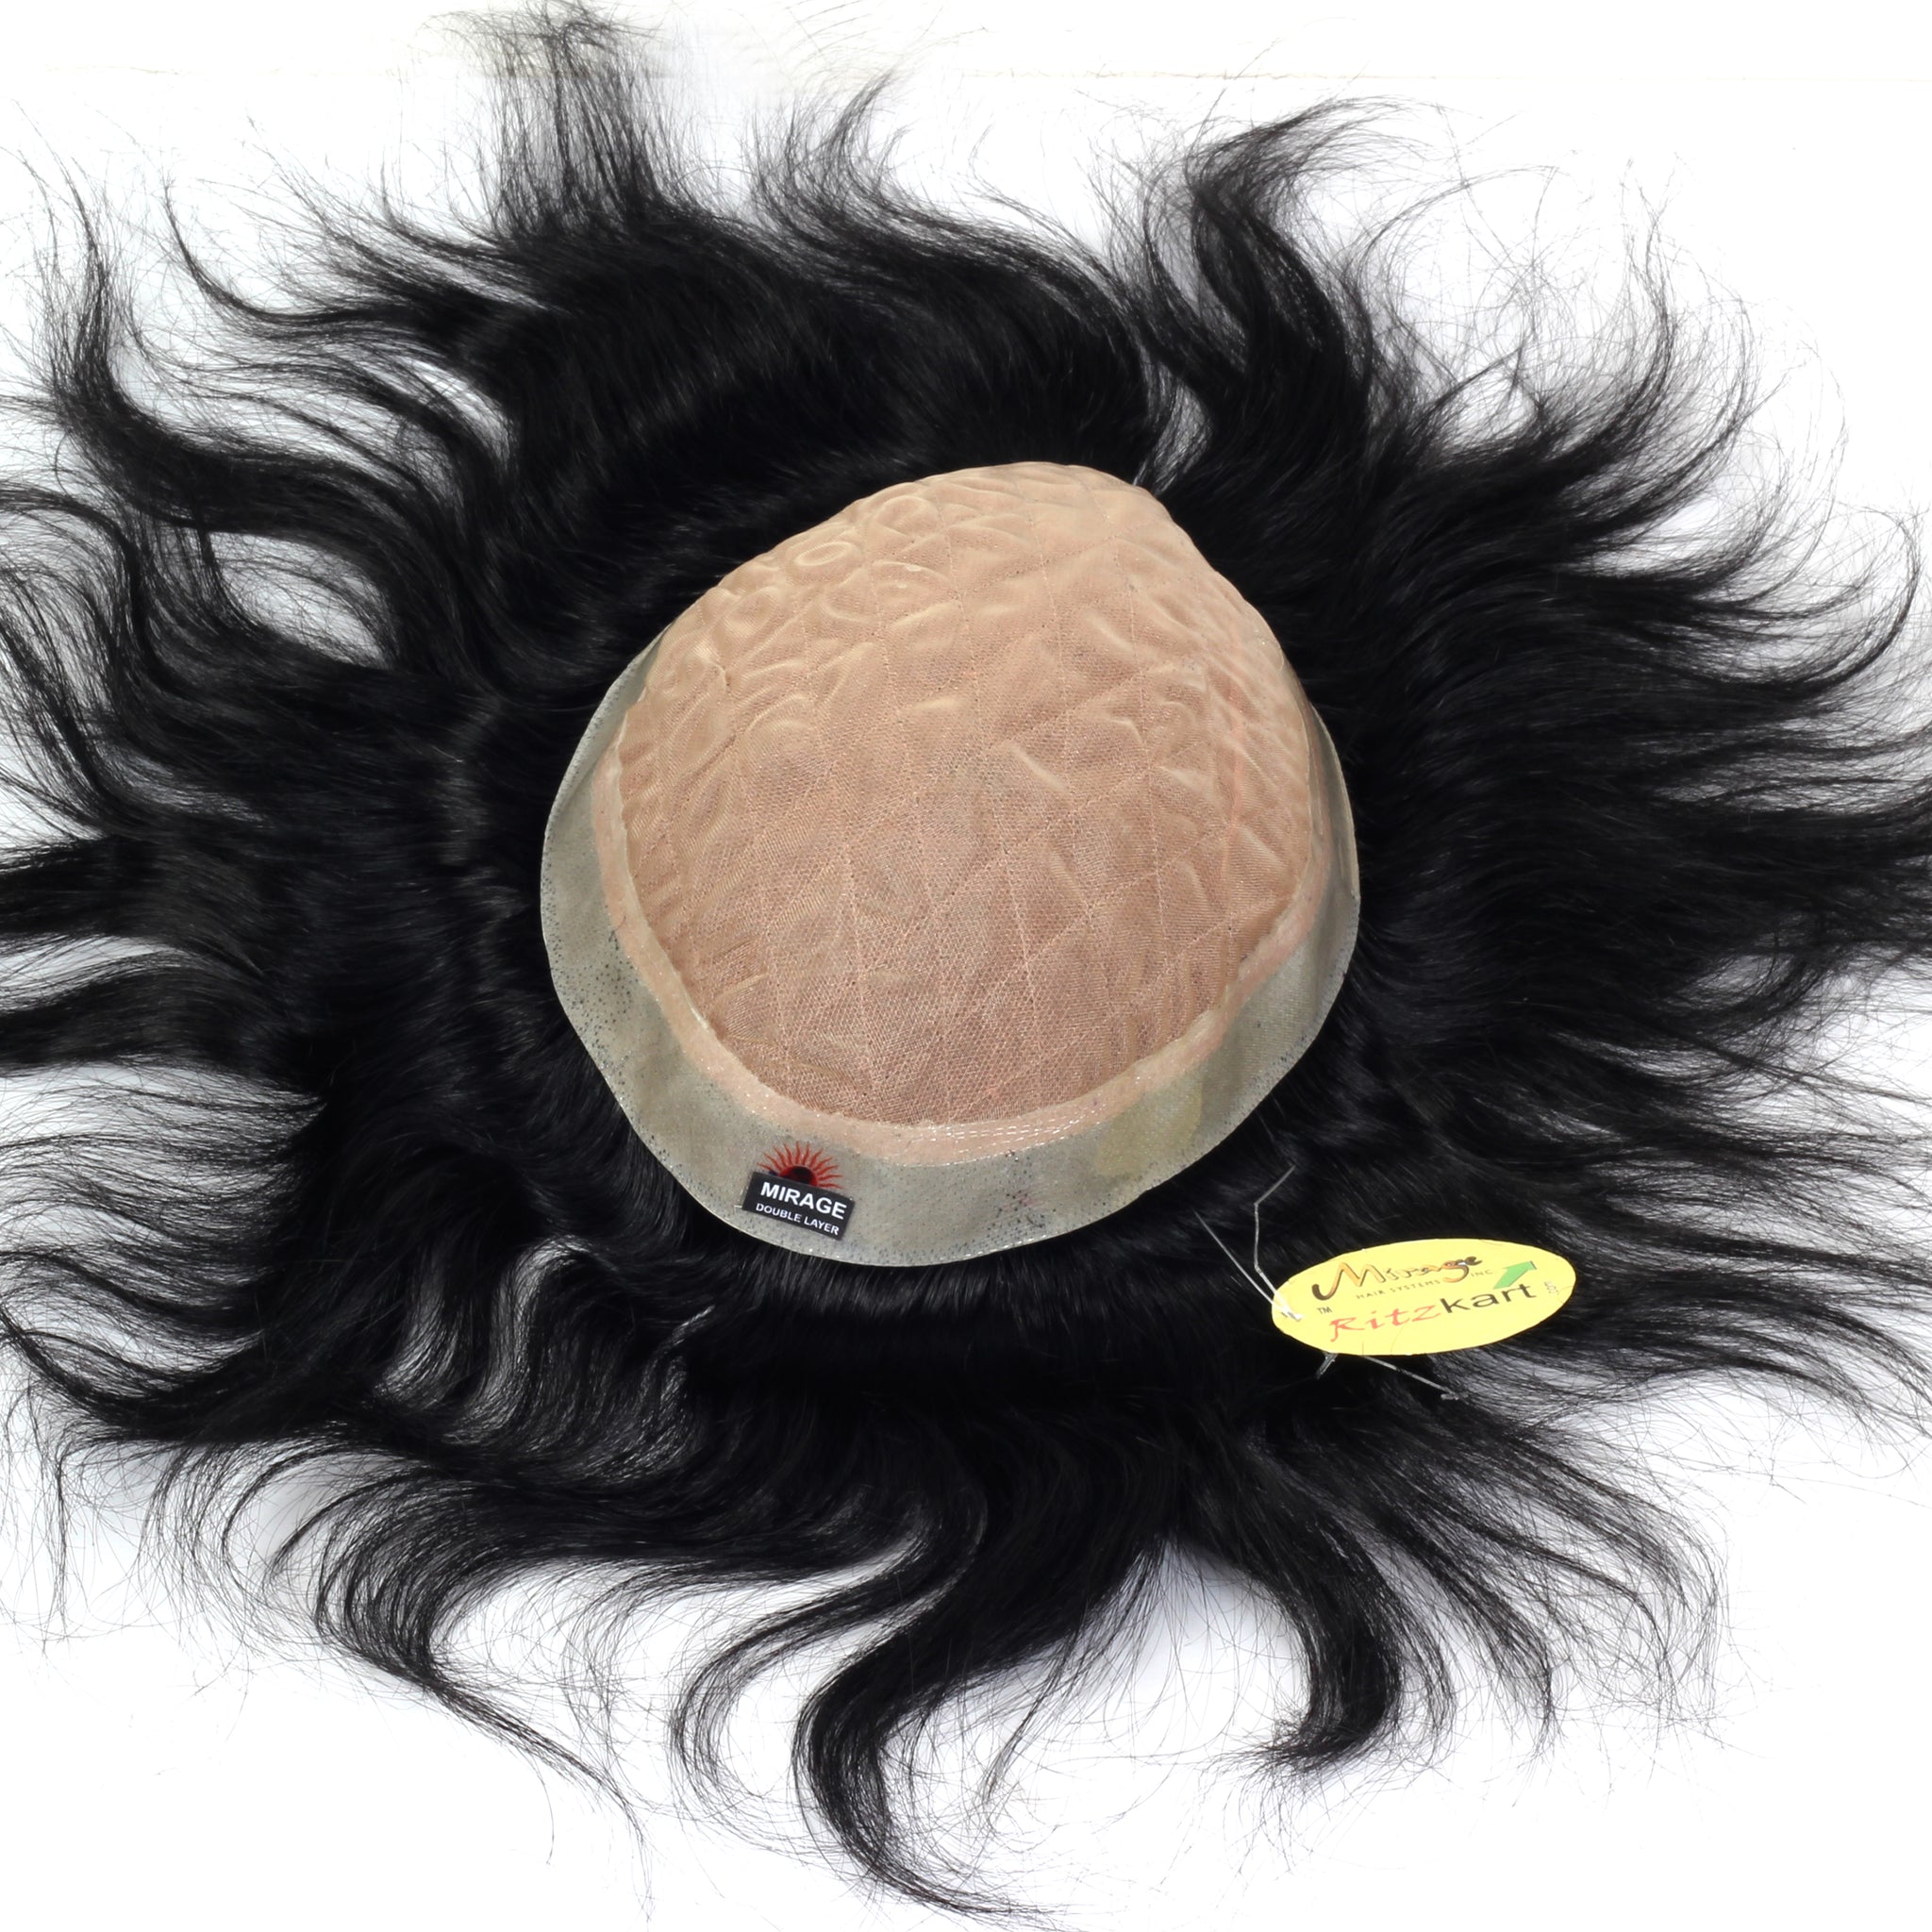 7x5 Natural Black Human Hair Royal Mirage Patch Double Layer Skin Base Natural Hair Line With Extra Stitch Base Wig Non Surgical Men Hair Replacement System For Long life